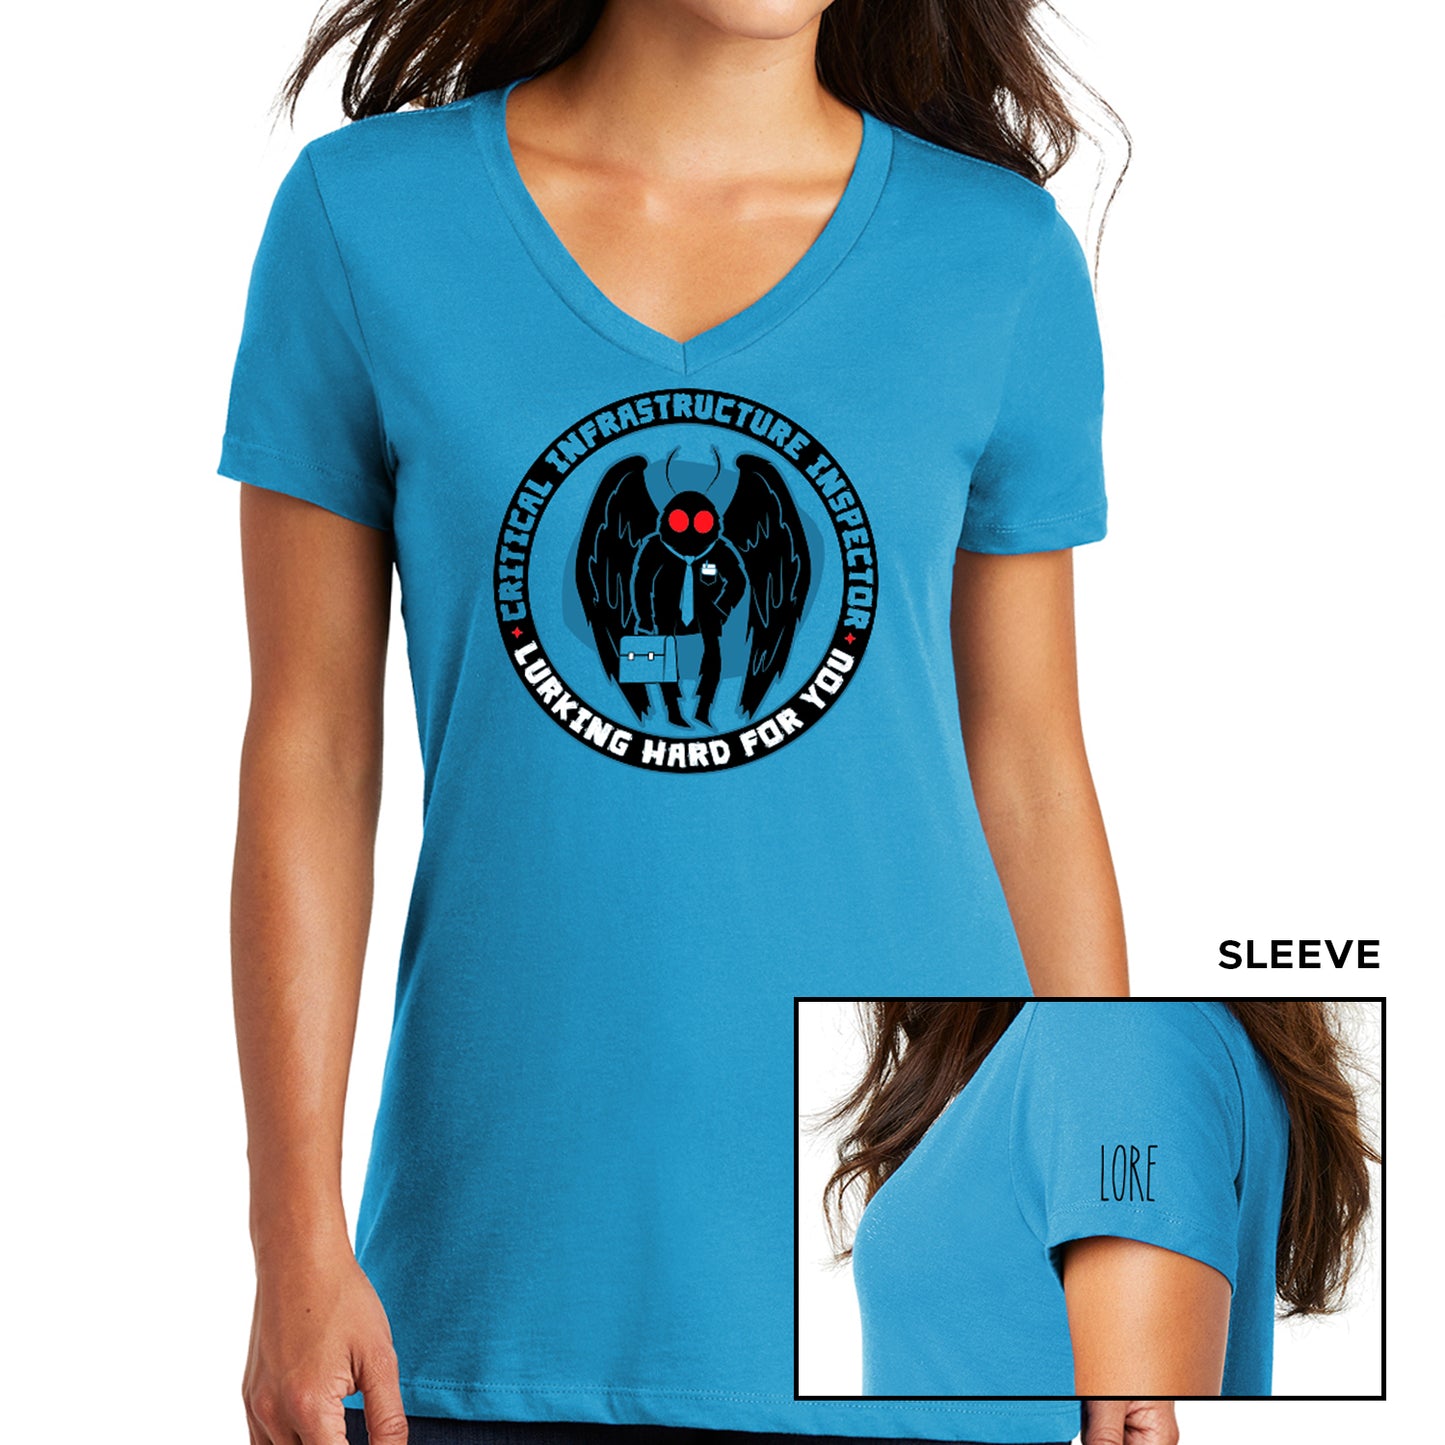 A female model wearing a turquoise, short-sleeved, V-neck tee. The tee has a black ring/circle printed with the words "Critical infrastructure inspector" in turquoise font and "Working hard for you" in white font. Within the ring is a black cartoon Mothman with red eyes, a turquoise tie, and a turqouise briefcase set against a darker shadow. One sleeve features the 'LORE' logo in black.